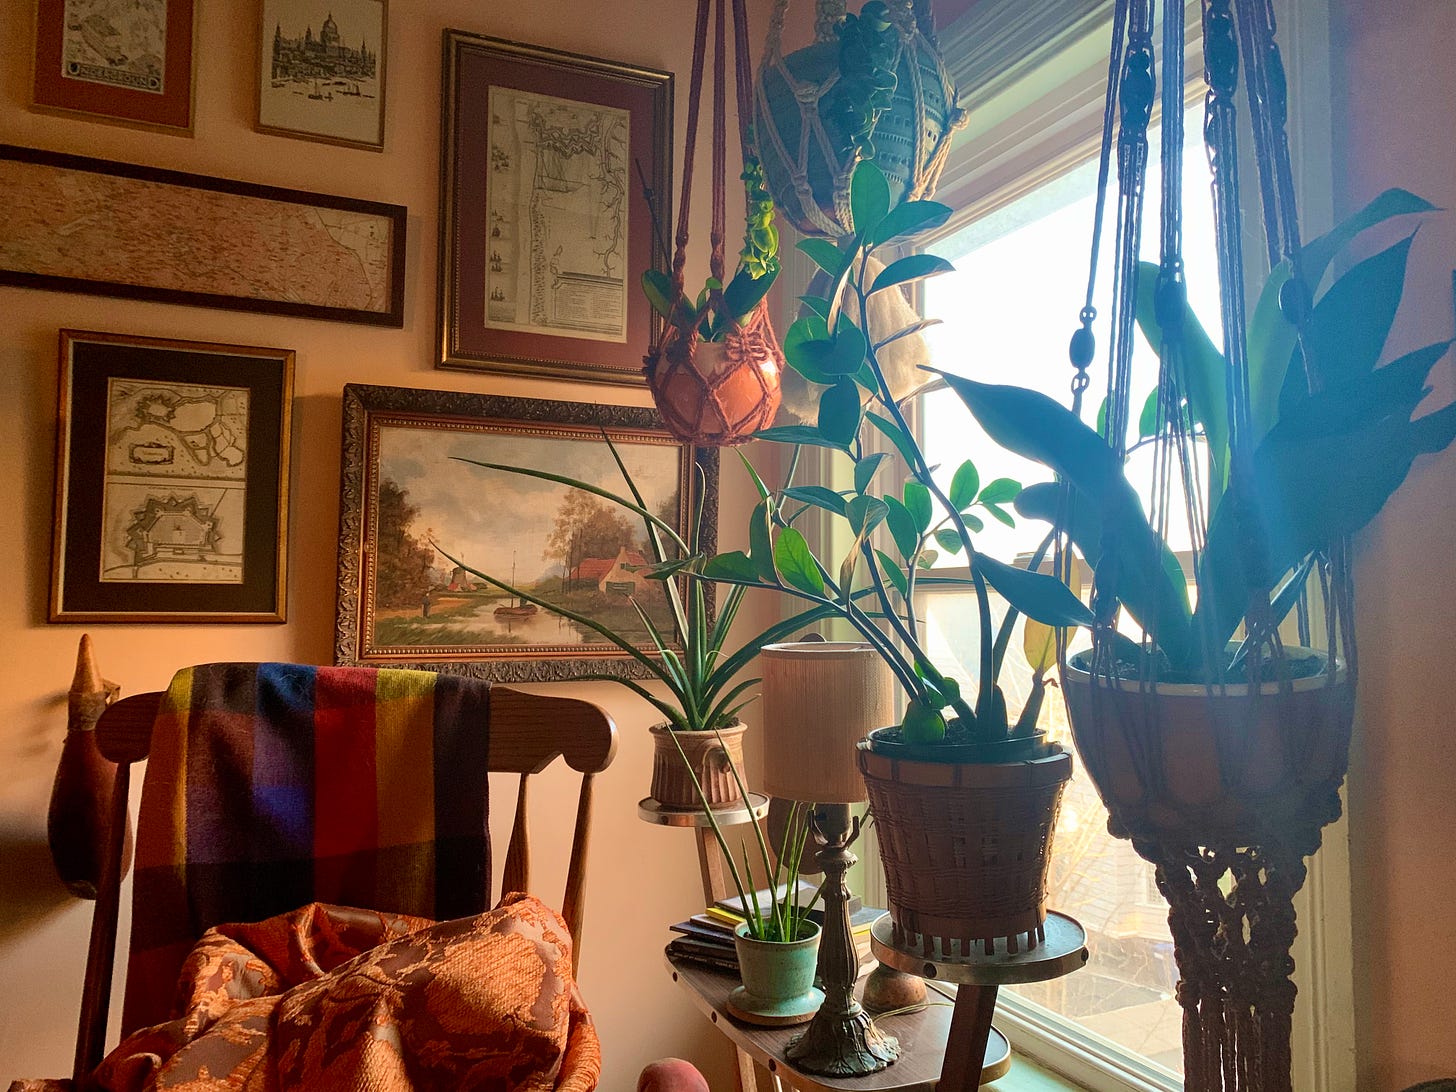 several plants on a table in front of a window, with framed art and a rocking chair